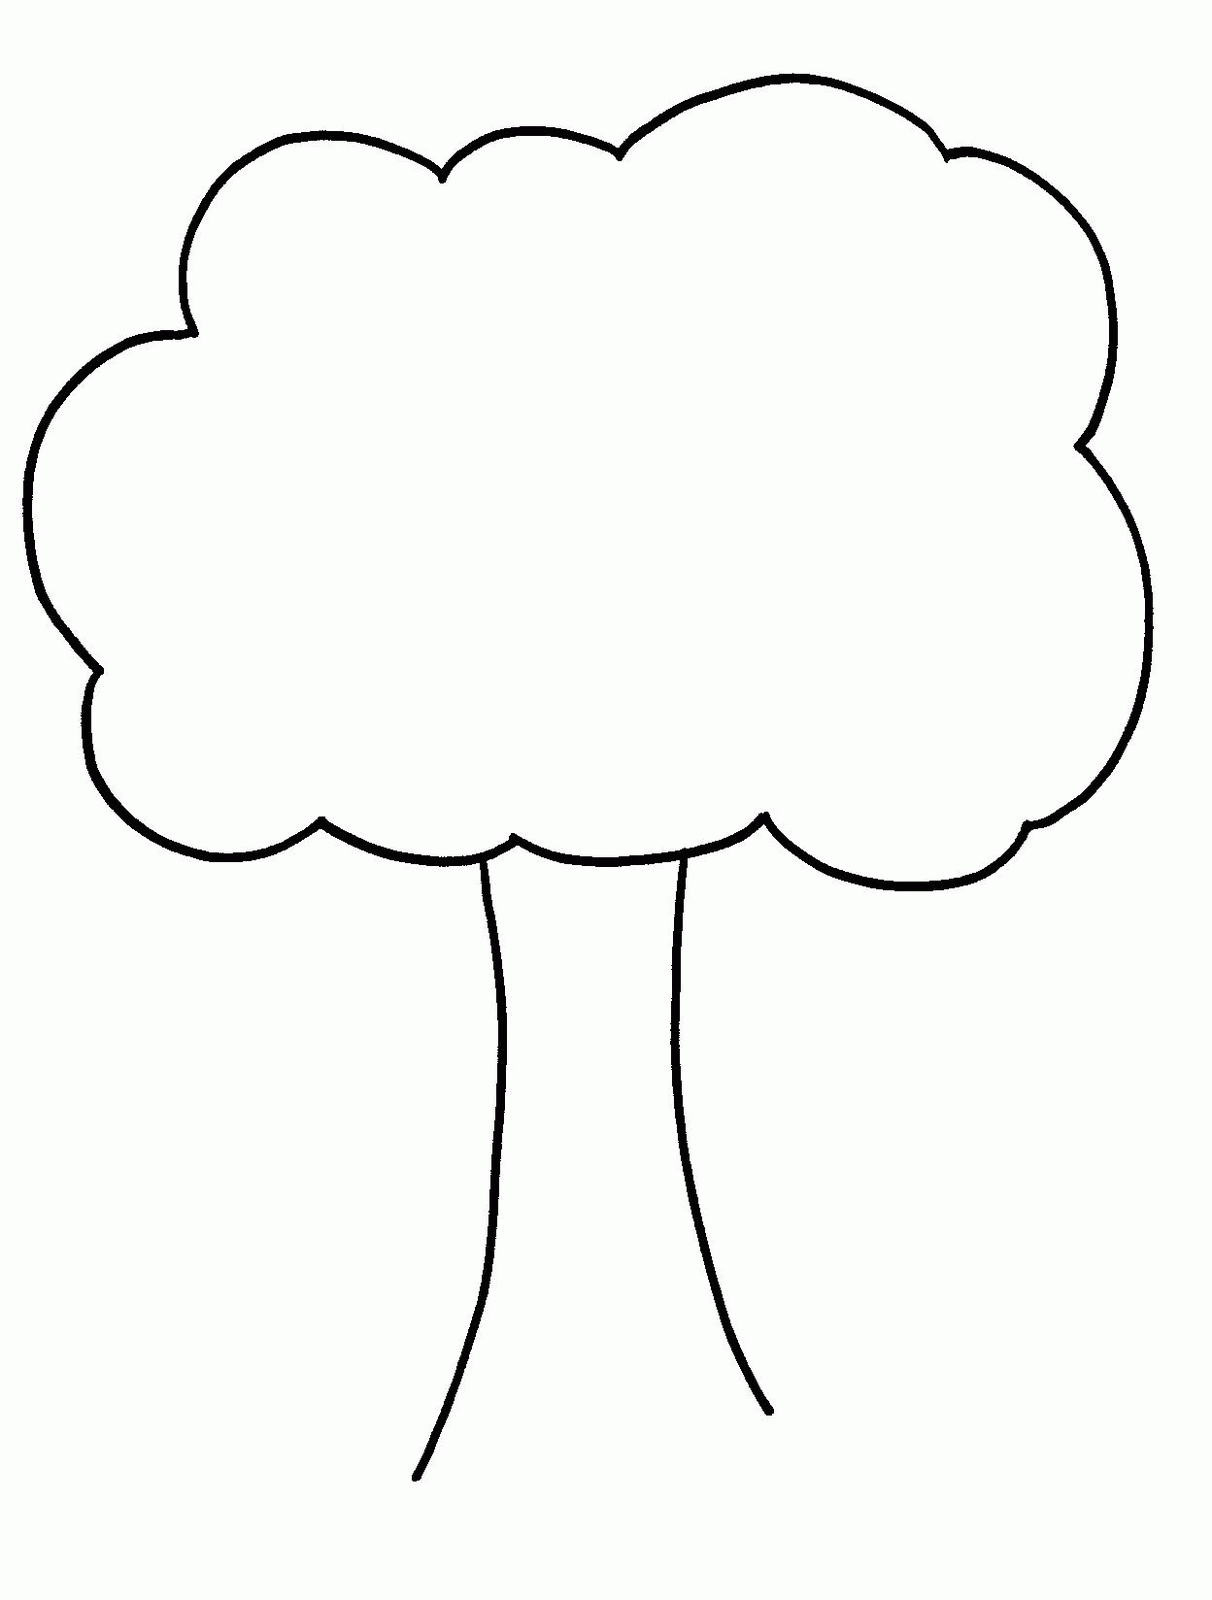 Outline Of Tree Page For Kids And For Adults Coloring Home